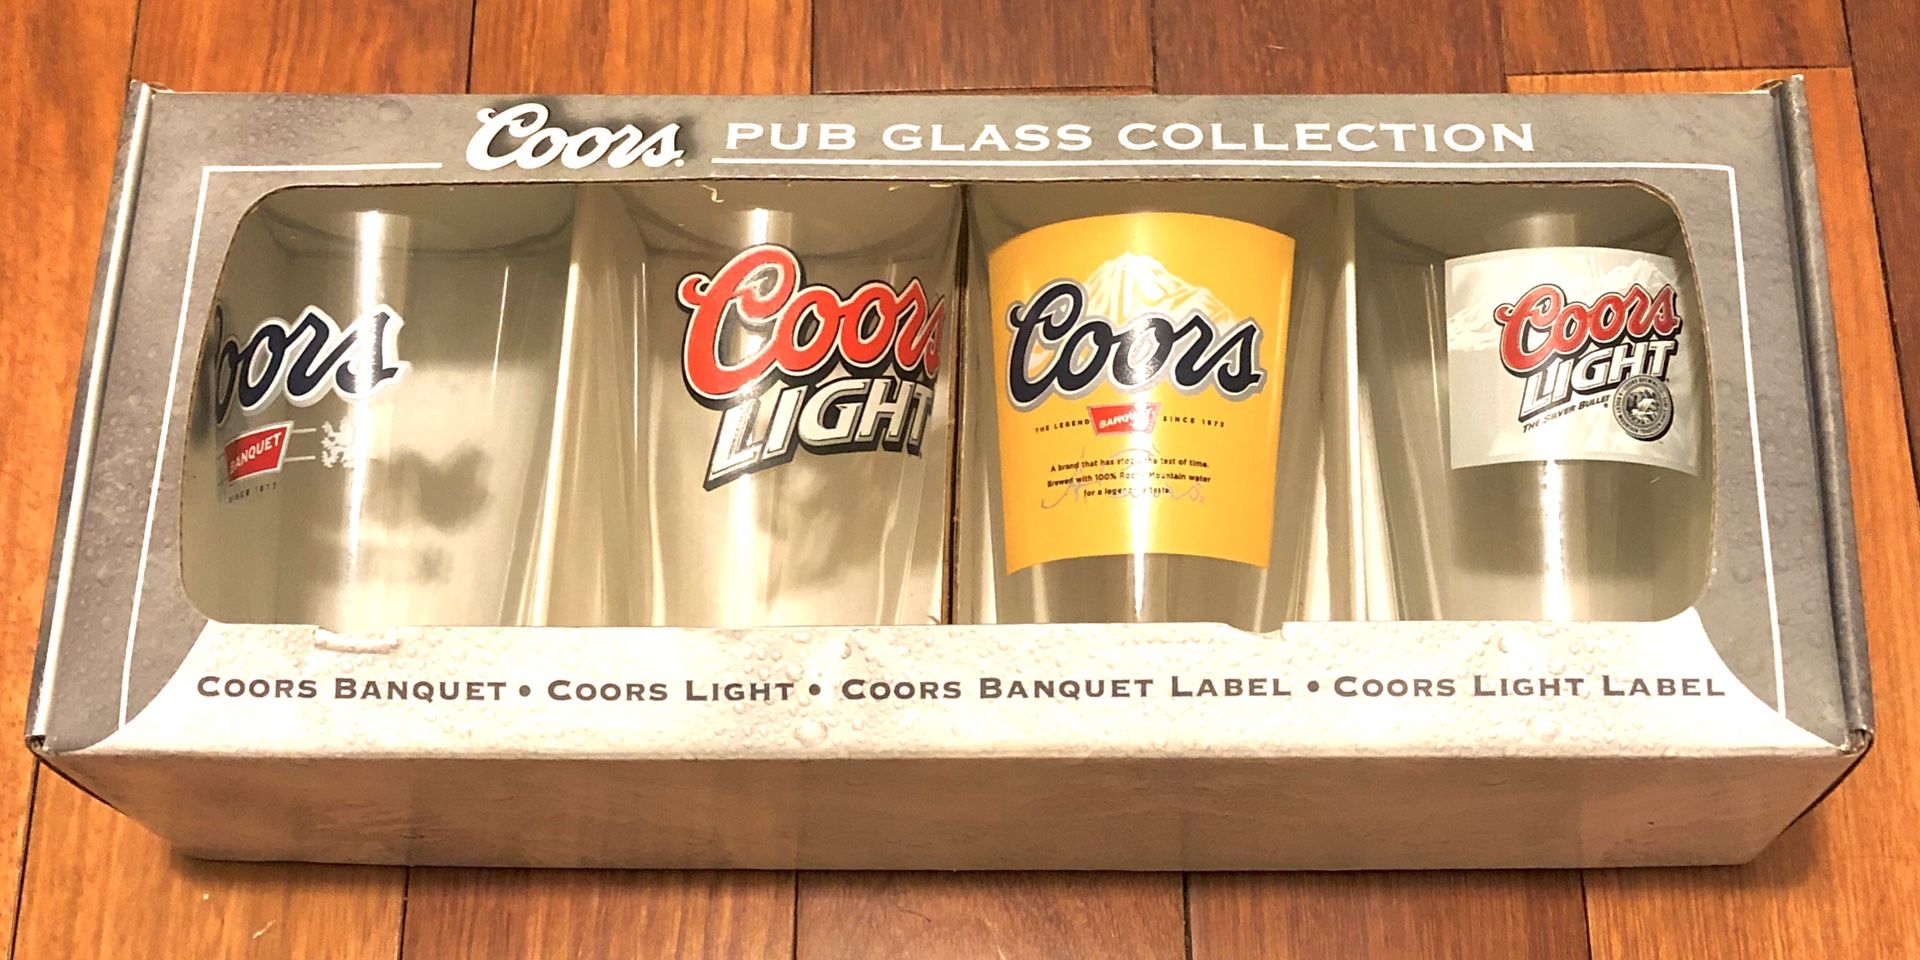 Coors Pub Glass Collection NEW